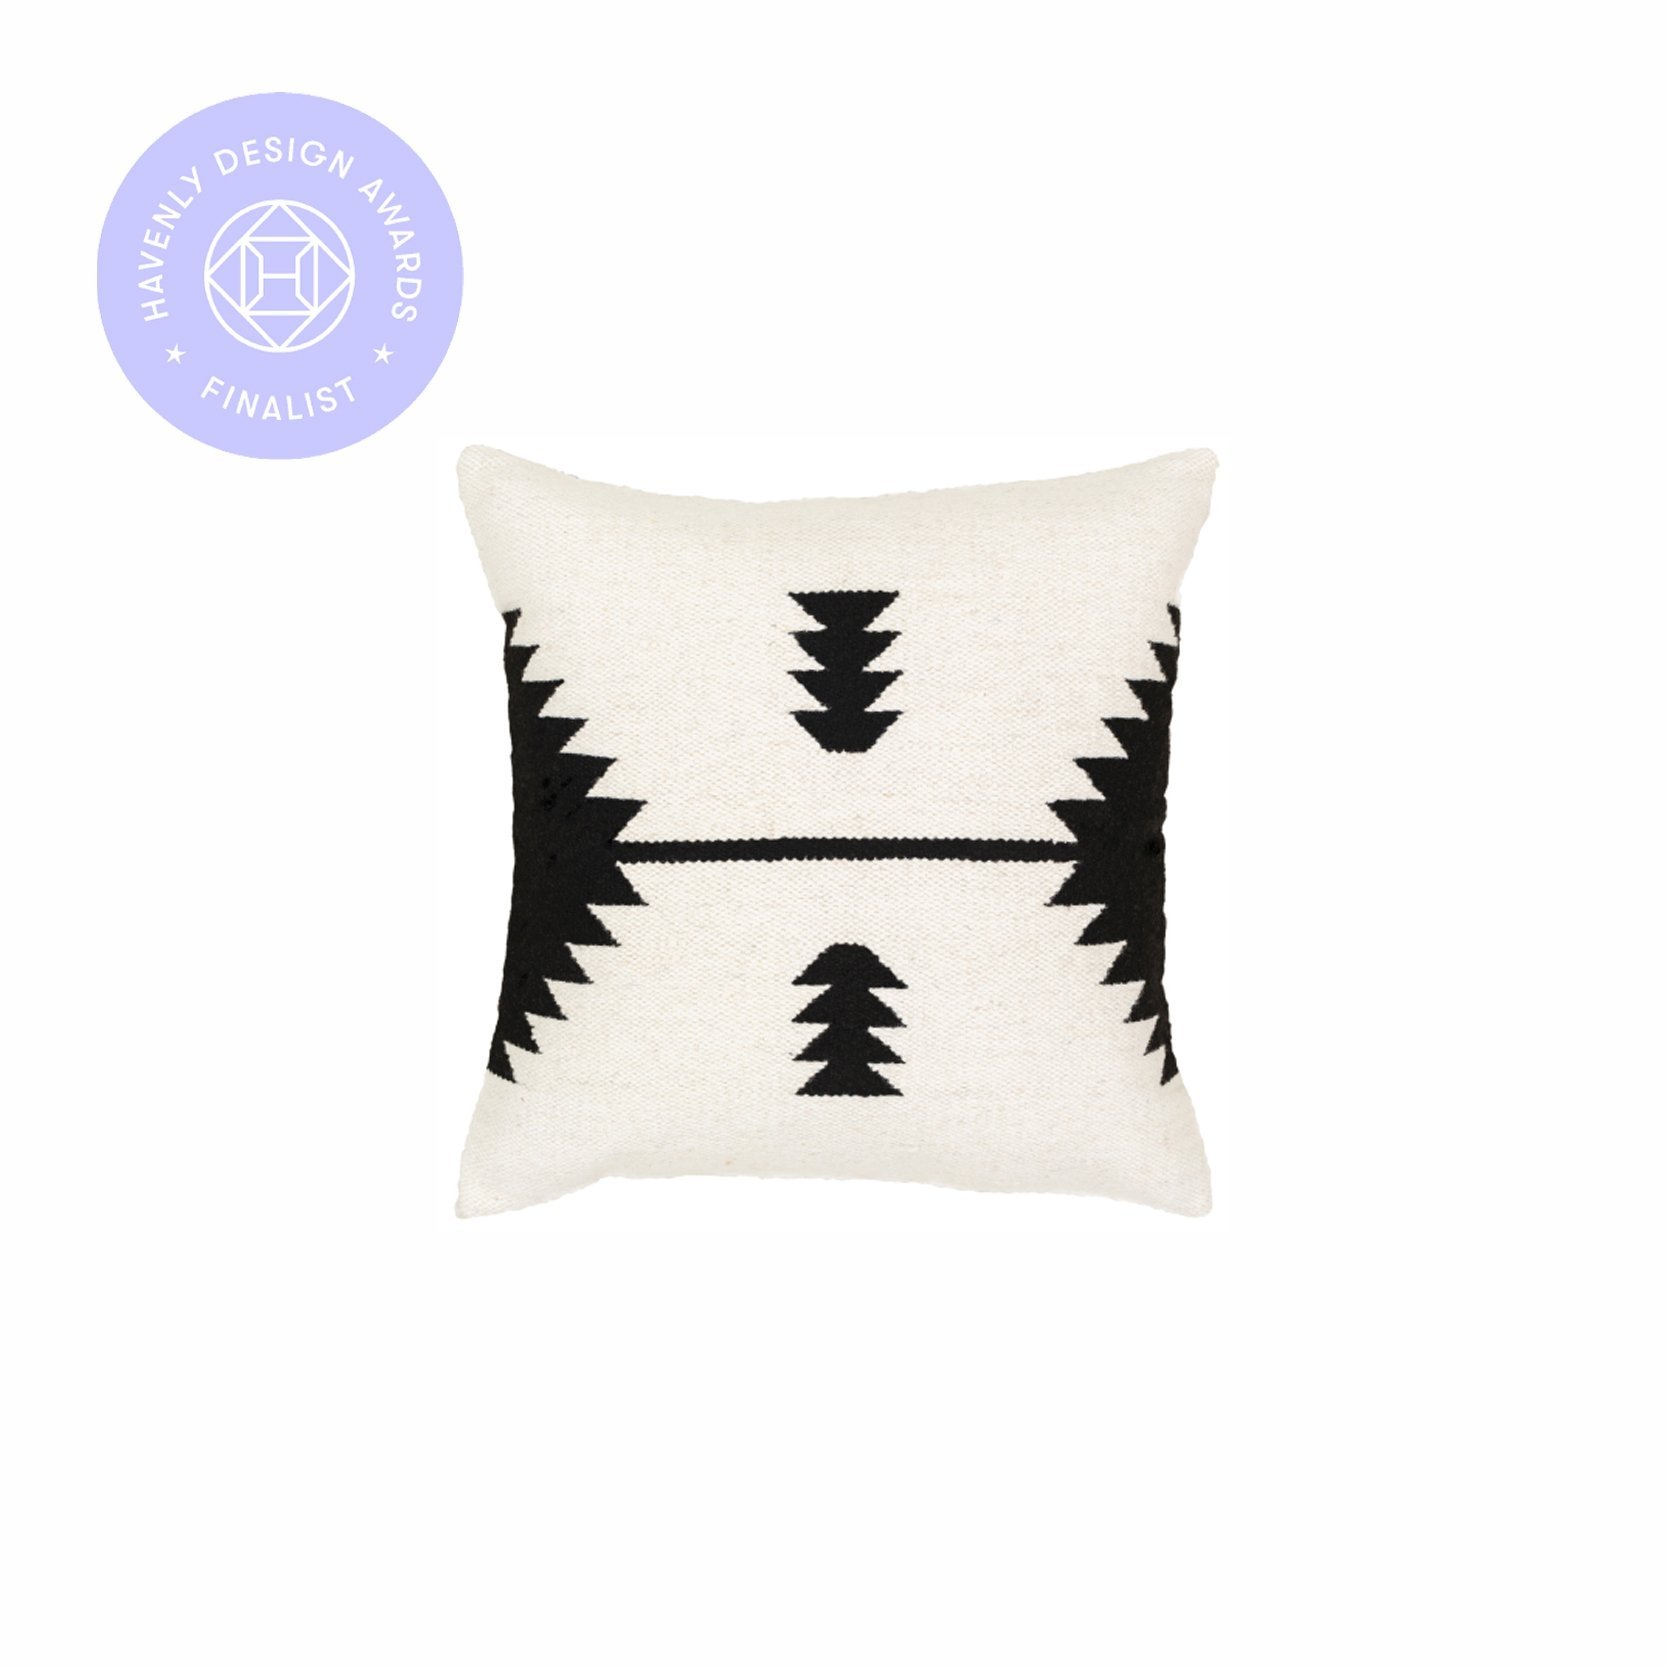 Shiprock Throw Pillow, 20" x 20", with down insert - Image 0